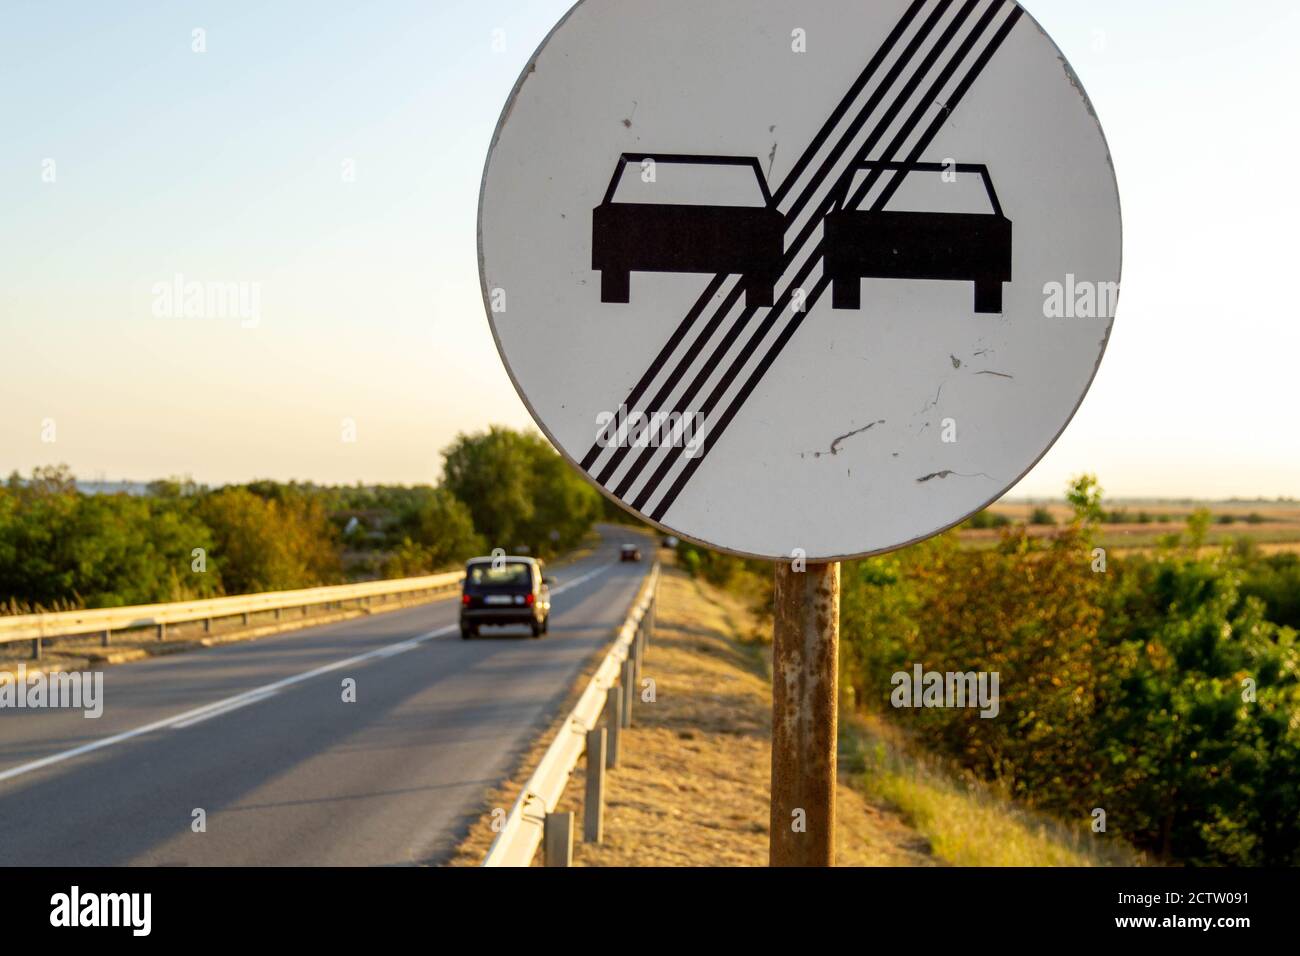 'Do not overtake' roadsign, with the road in the background Stock Photo